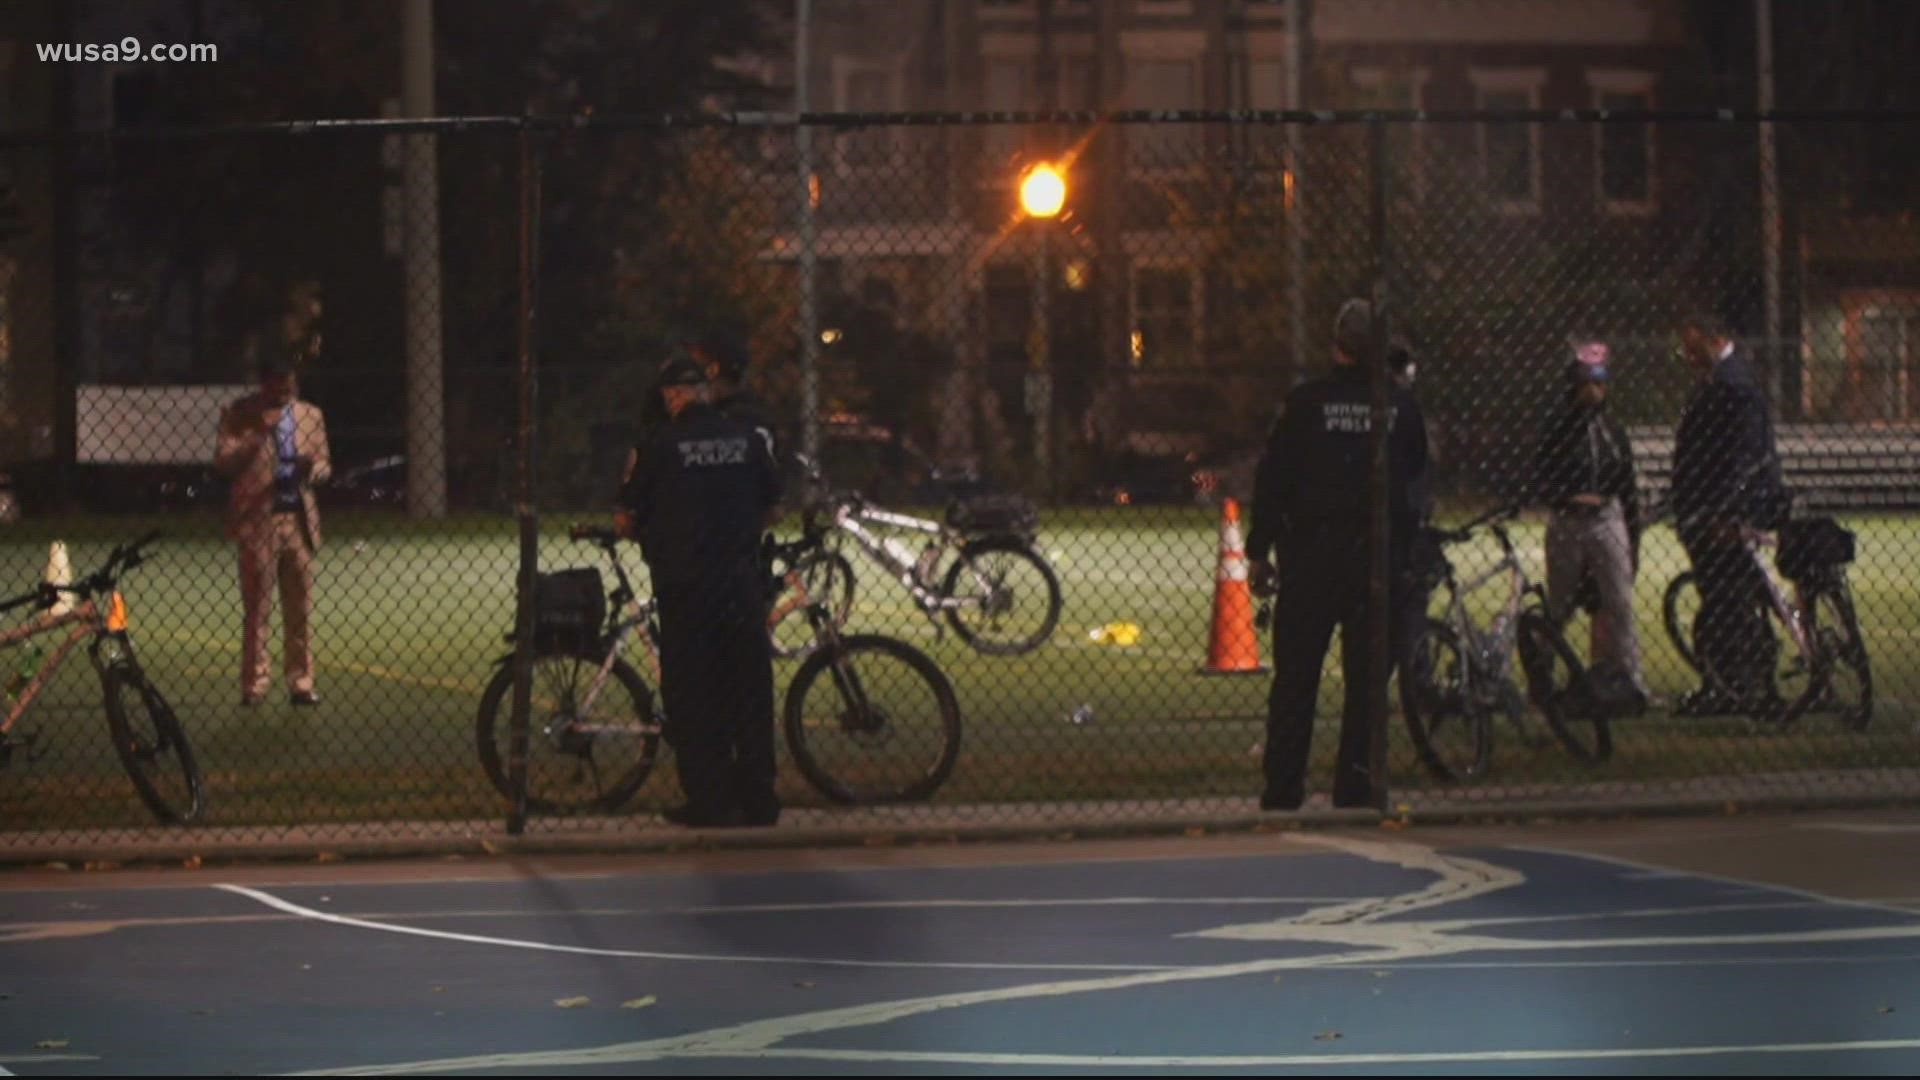 It was one of two homicides in about two hours in DC Wednesday night.